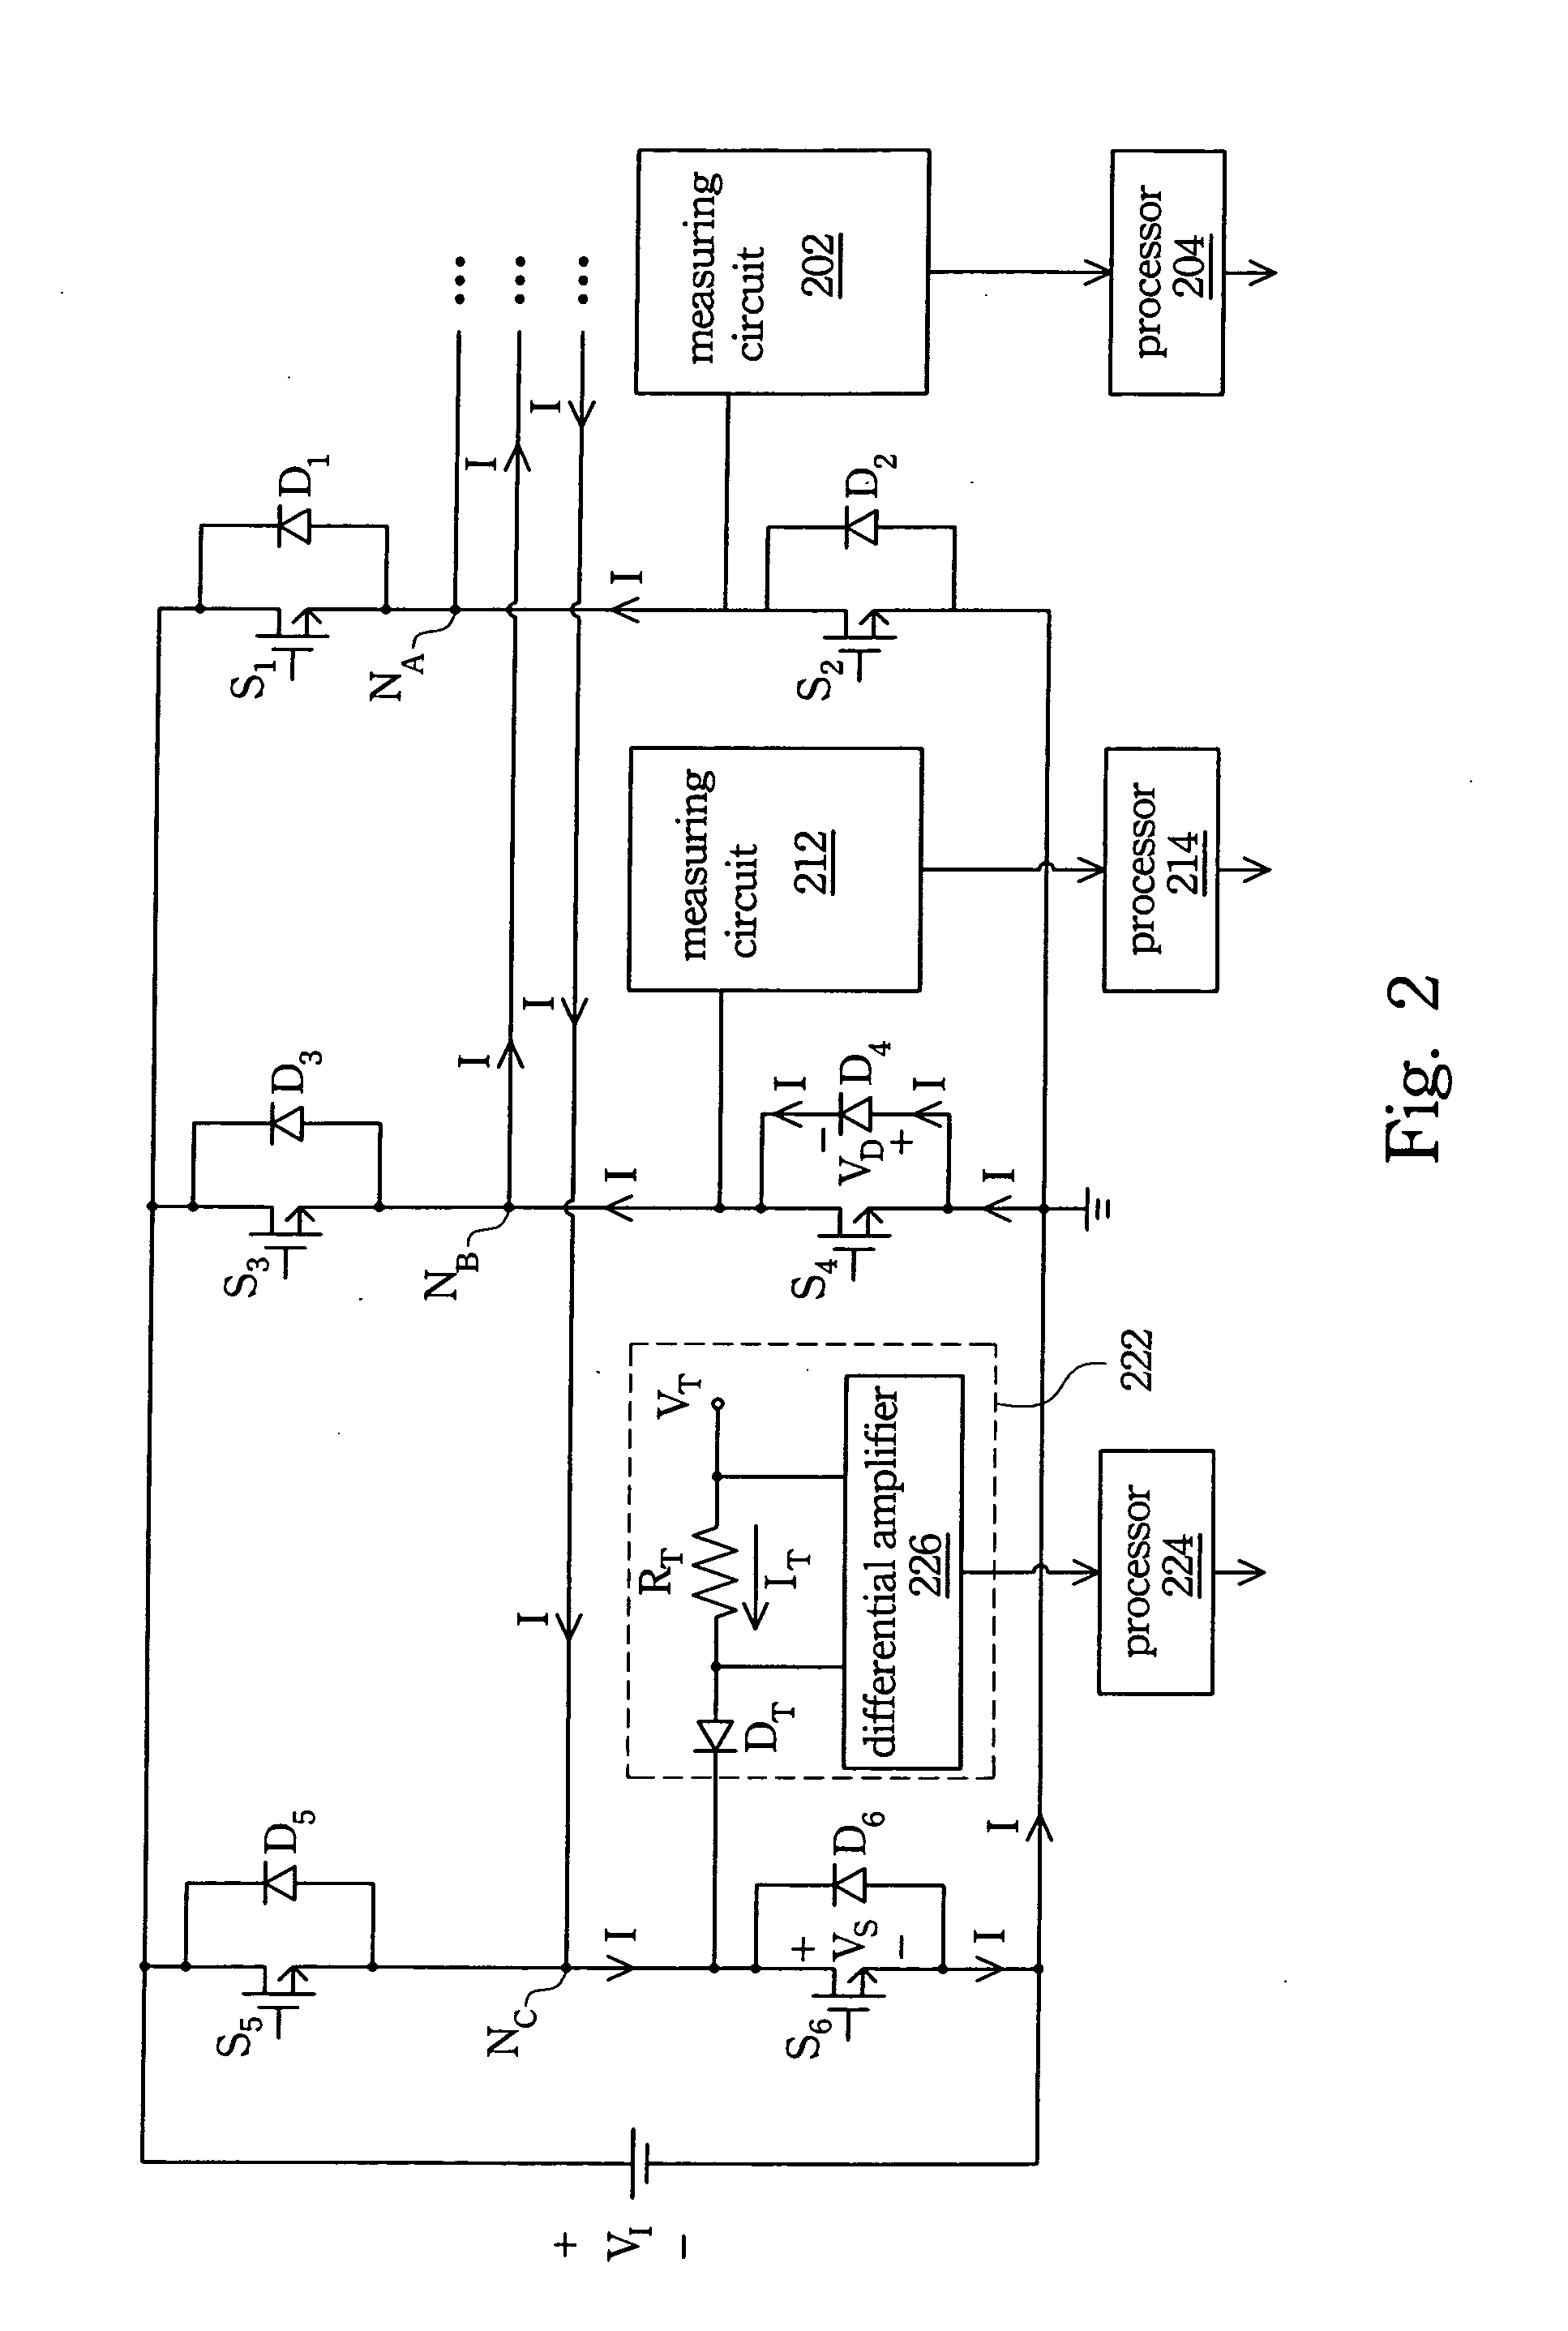 Voltage compensating circuit for a sensorless type DC brushless motor